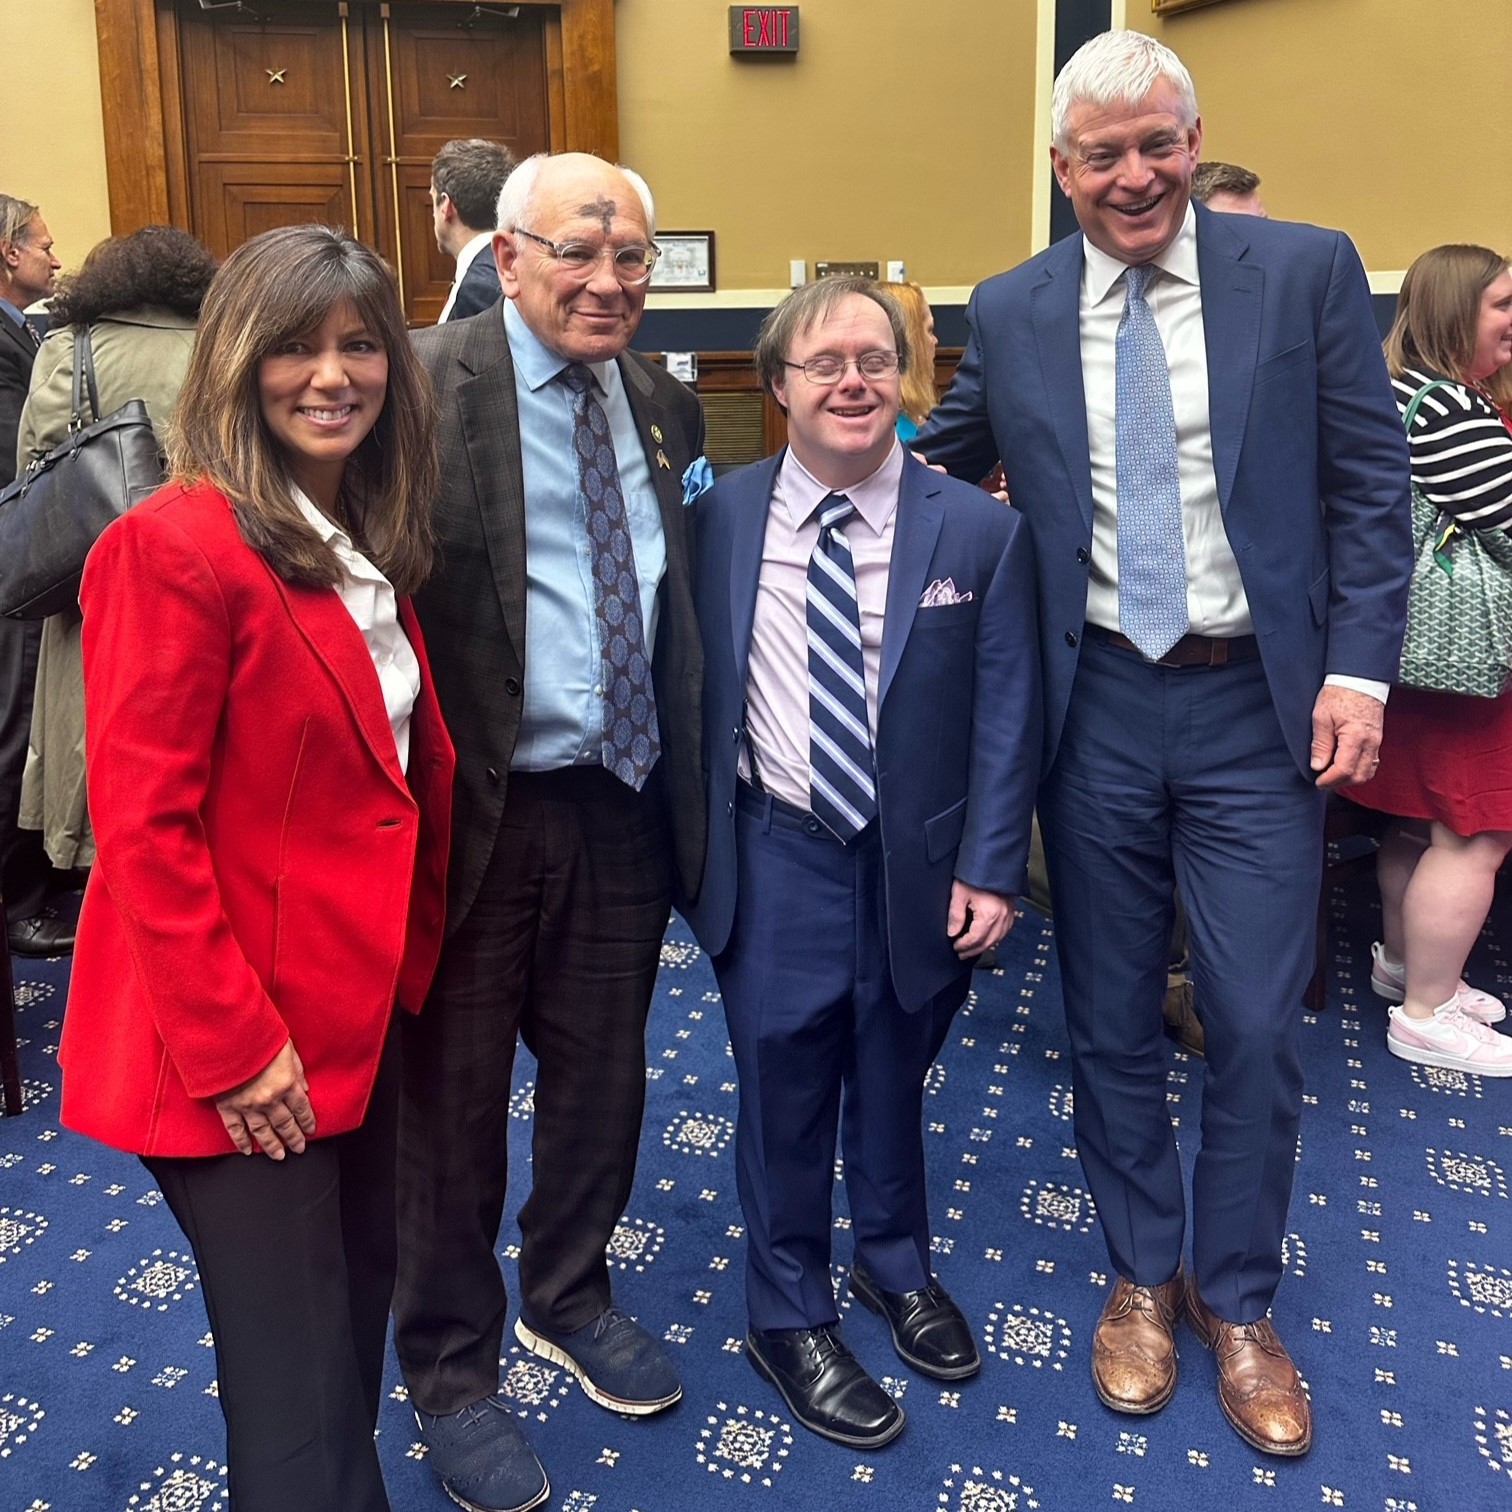 Important NIH INCLUDE Legislation Aimed at Increasing Lifespan and Dramatically Improving Health Outcomes for People with Down Syndrome Introduced by GLOBAL Champion, Congresswoman Cathy McMorris Rodgers